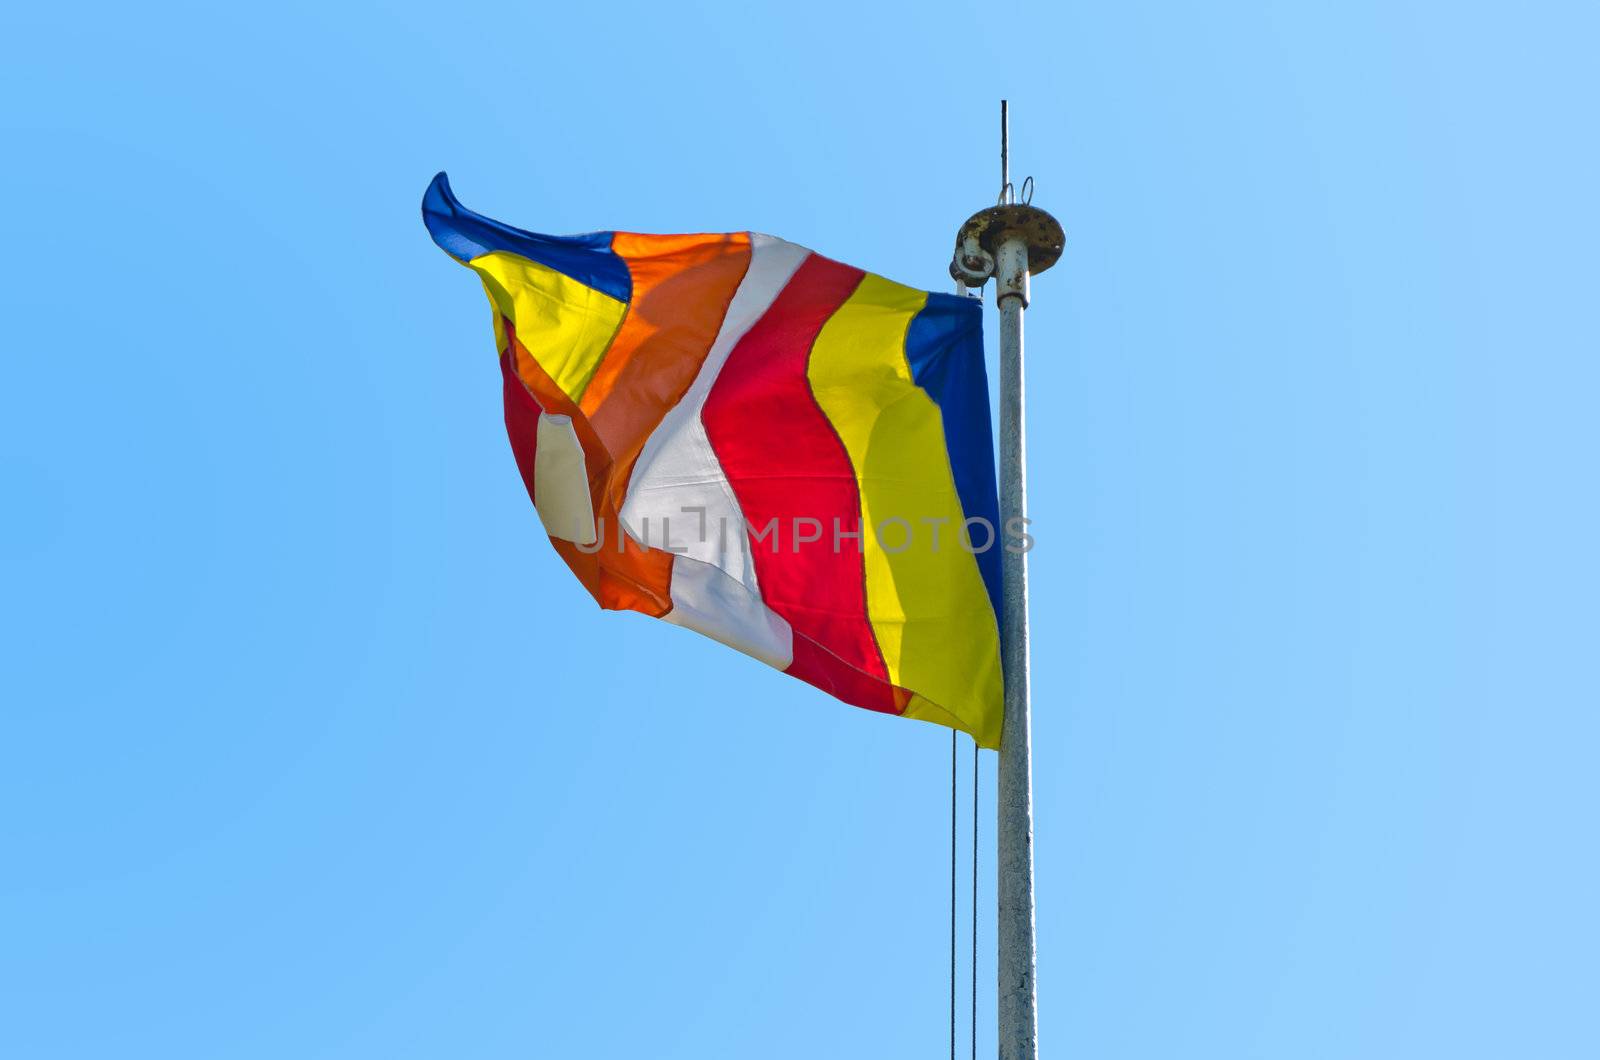 symbolic flag of Buddhism against the cloudless sky. The six vertical bands of the flag represent the six colors of the aura which Buddhists believe emanated from the body of the Buddha when he attained enlightenment